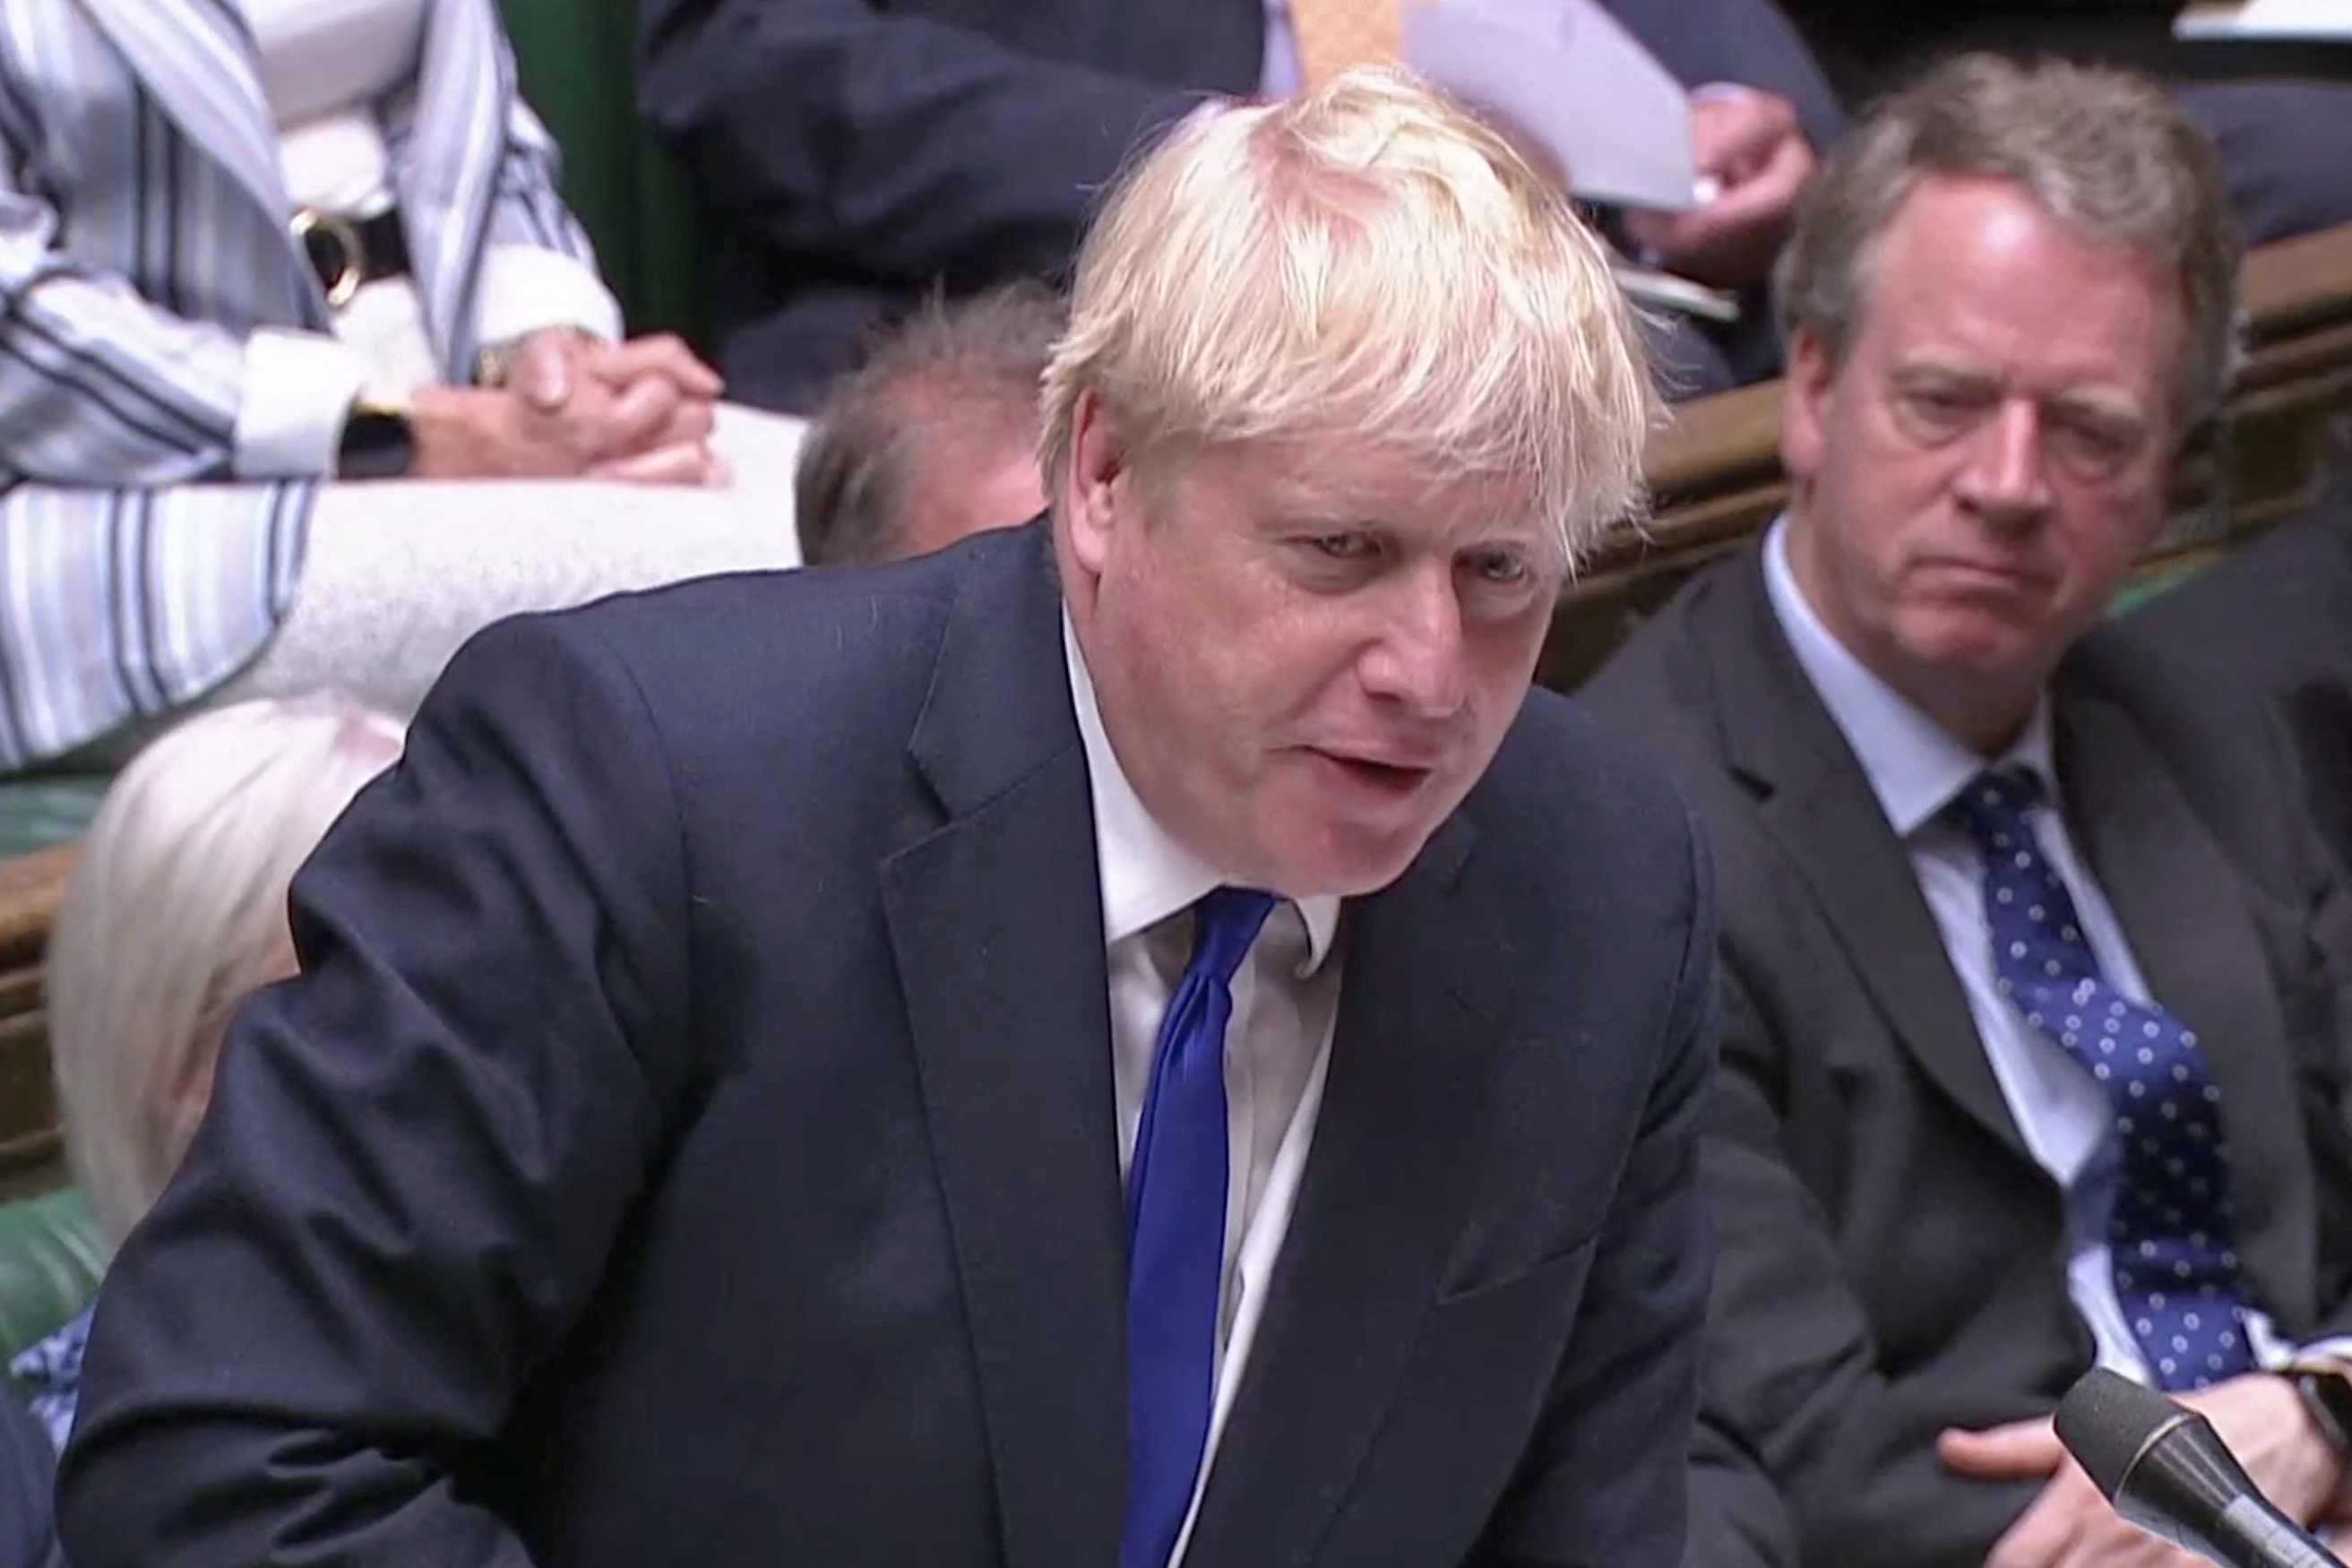 The Prime Minister appeared at the weekly questioning session in Parliament as he refused to resign again (Reuters TV)